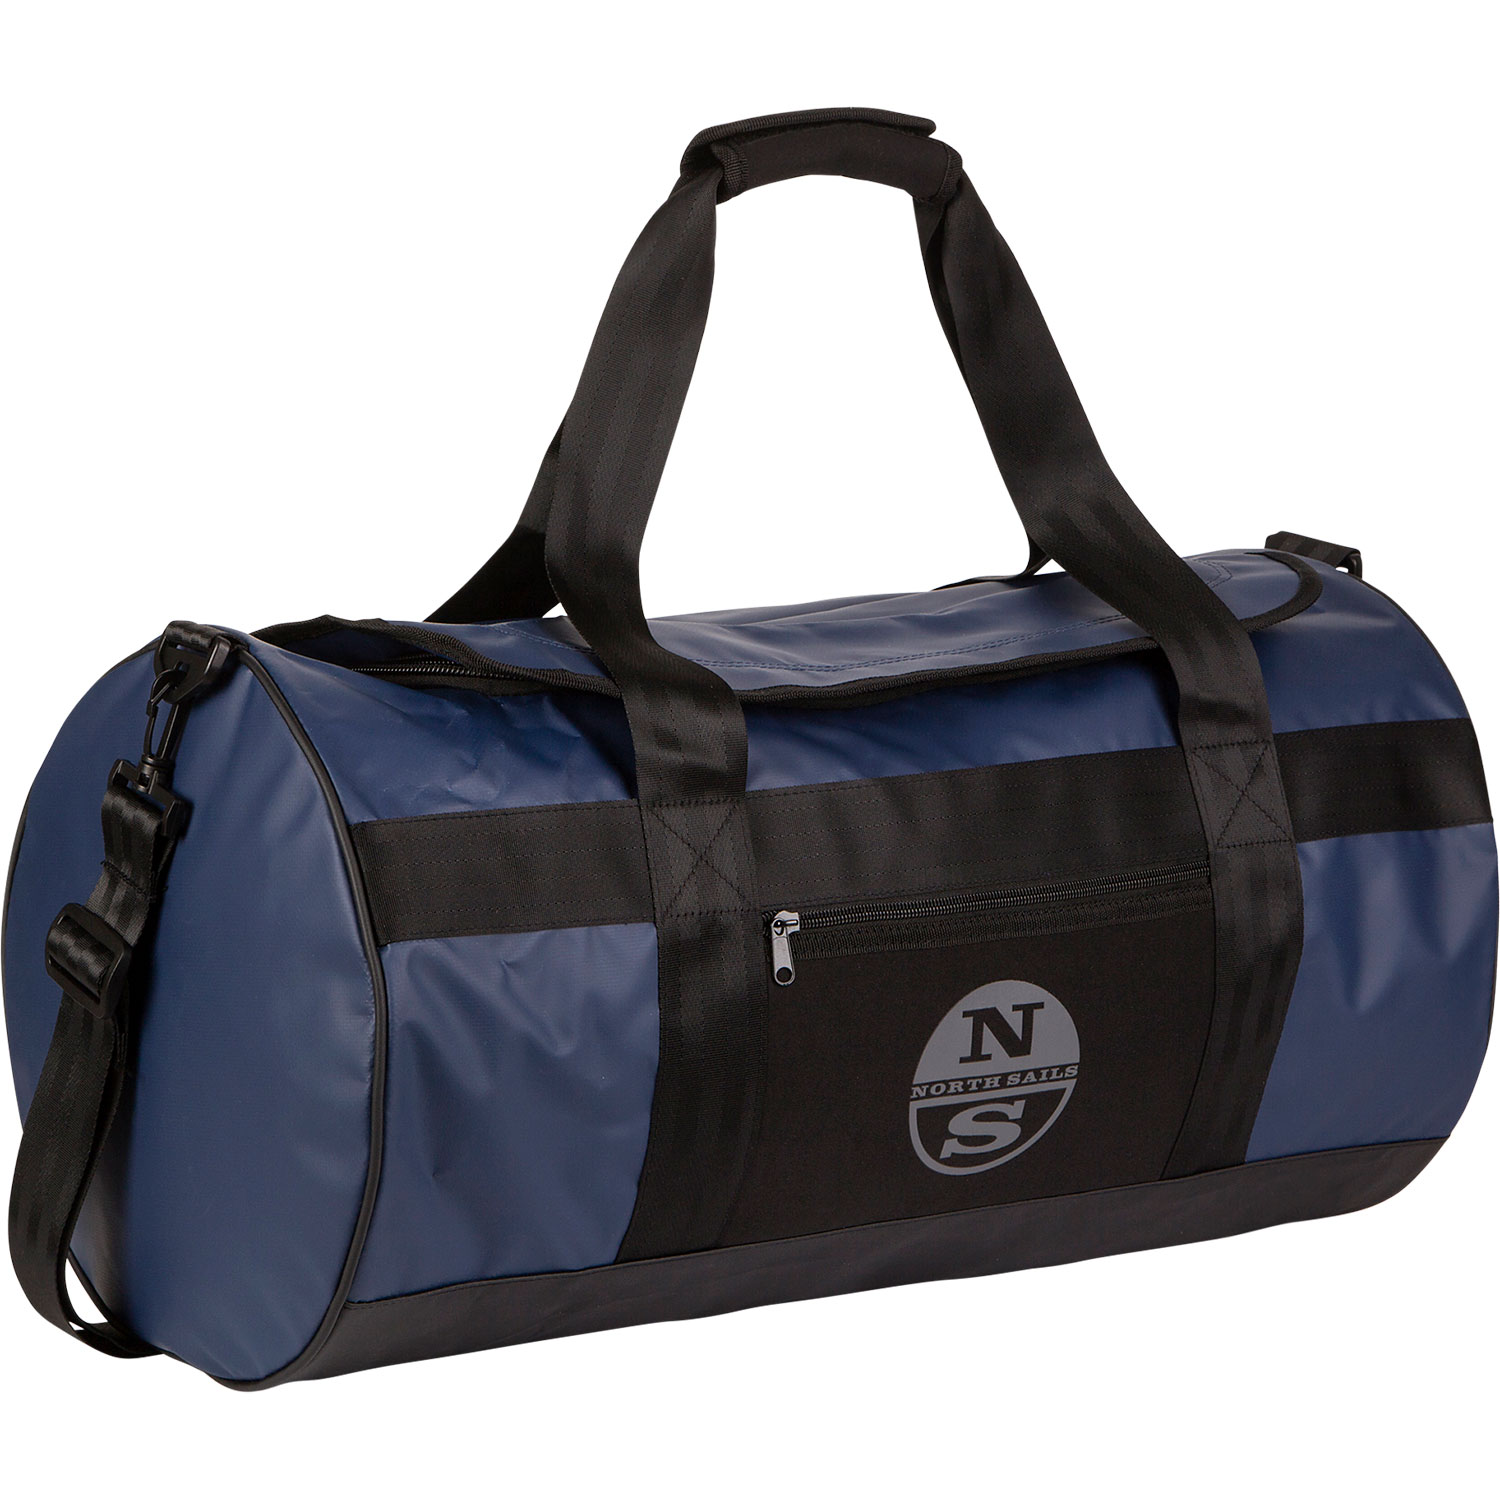 water sports bag